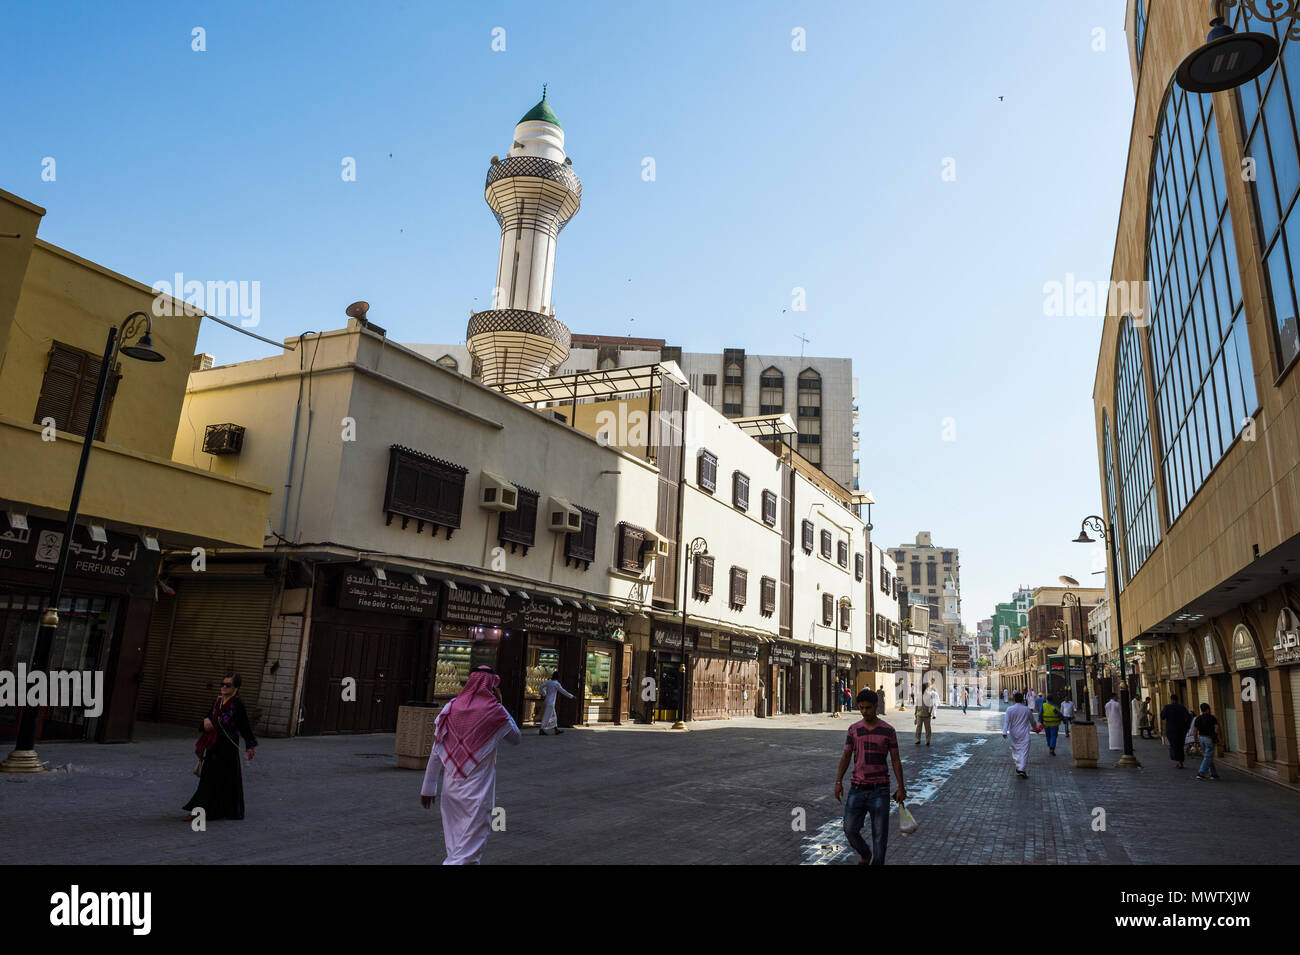 The bazaar area of the old town of Jeddah, UNESCO World Heritage Site, Saudi Arabia, Middle East Stock Photo